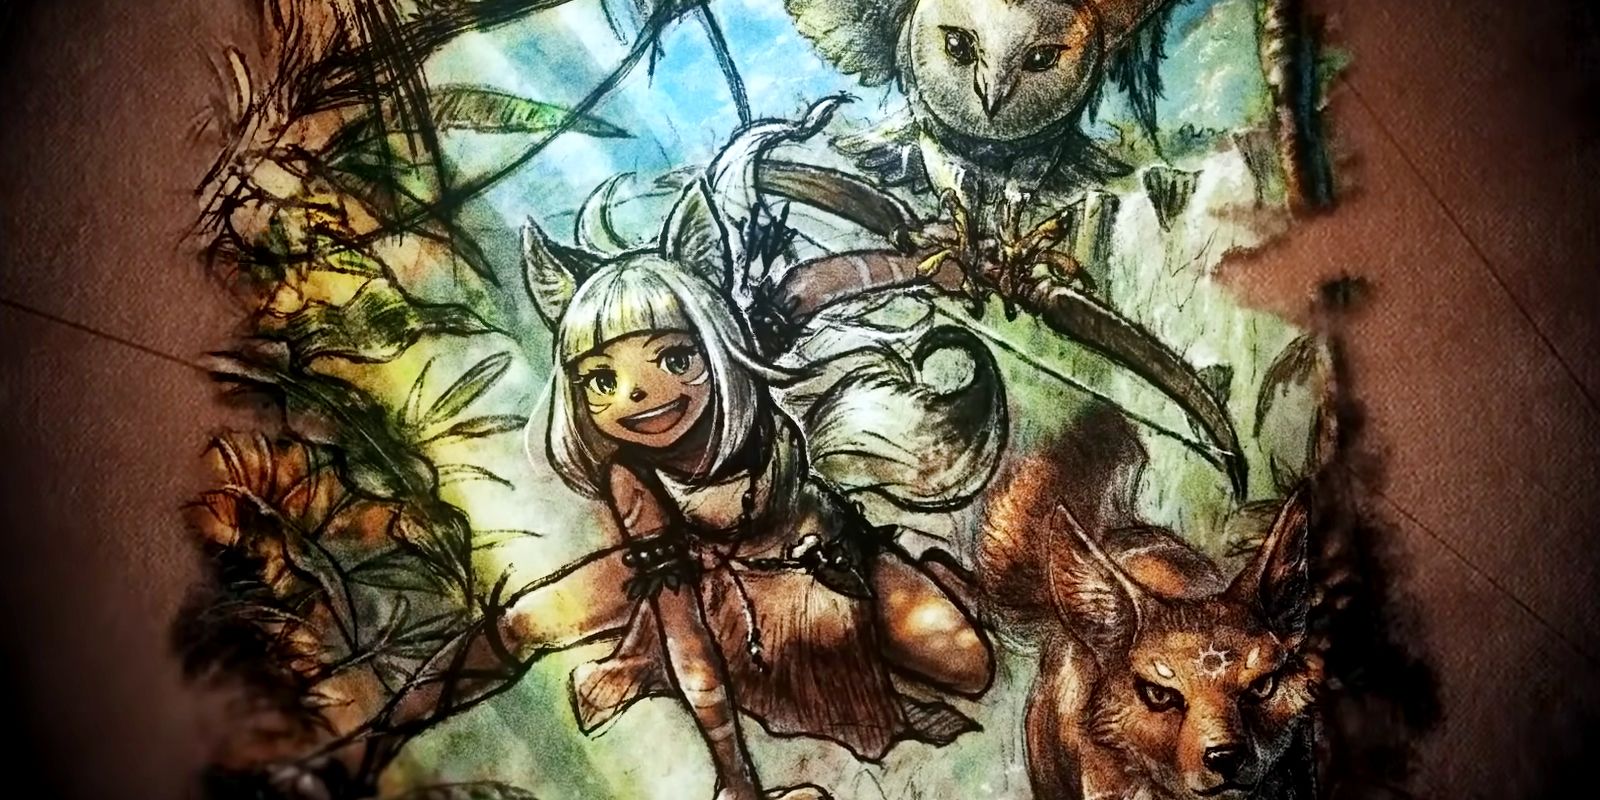 Official Octopath Traveler 2 artwork of Ochette, the hunter and one of eight main characters, holding a bow next to an owl and fox.